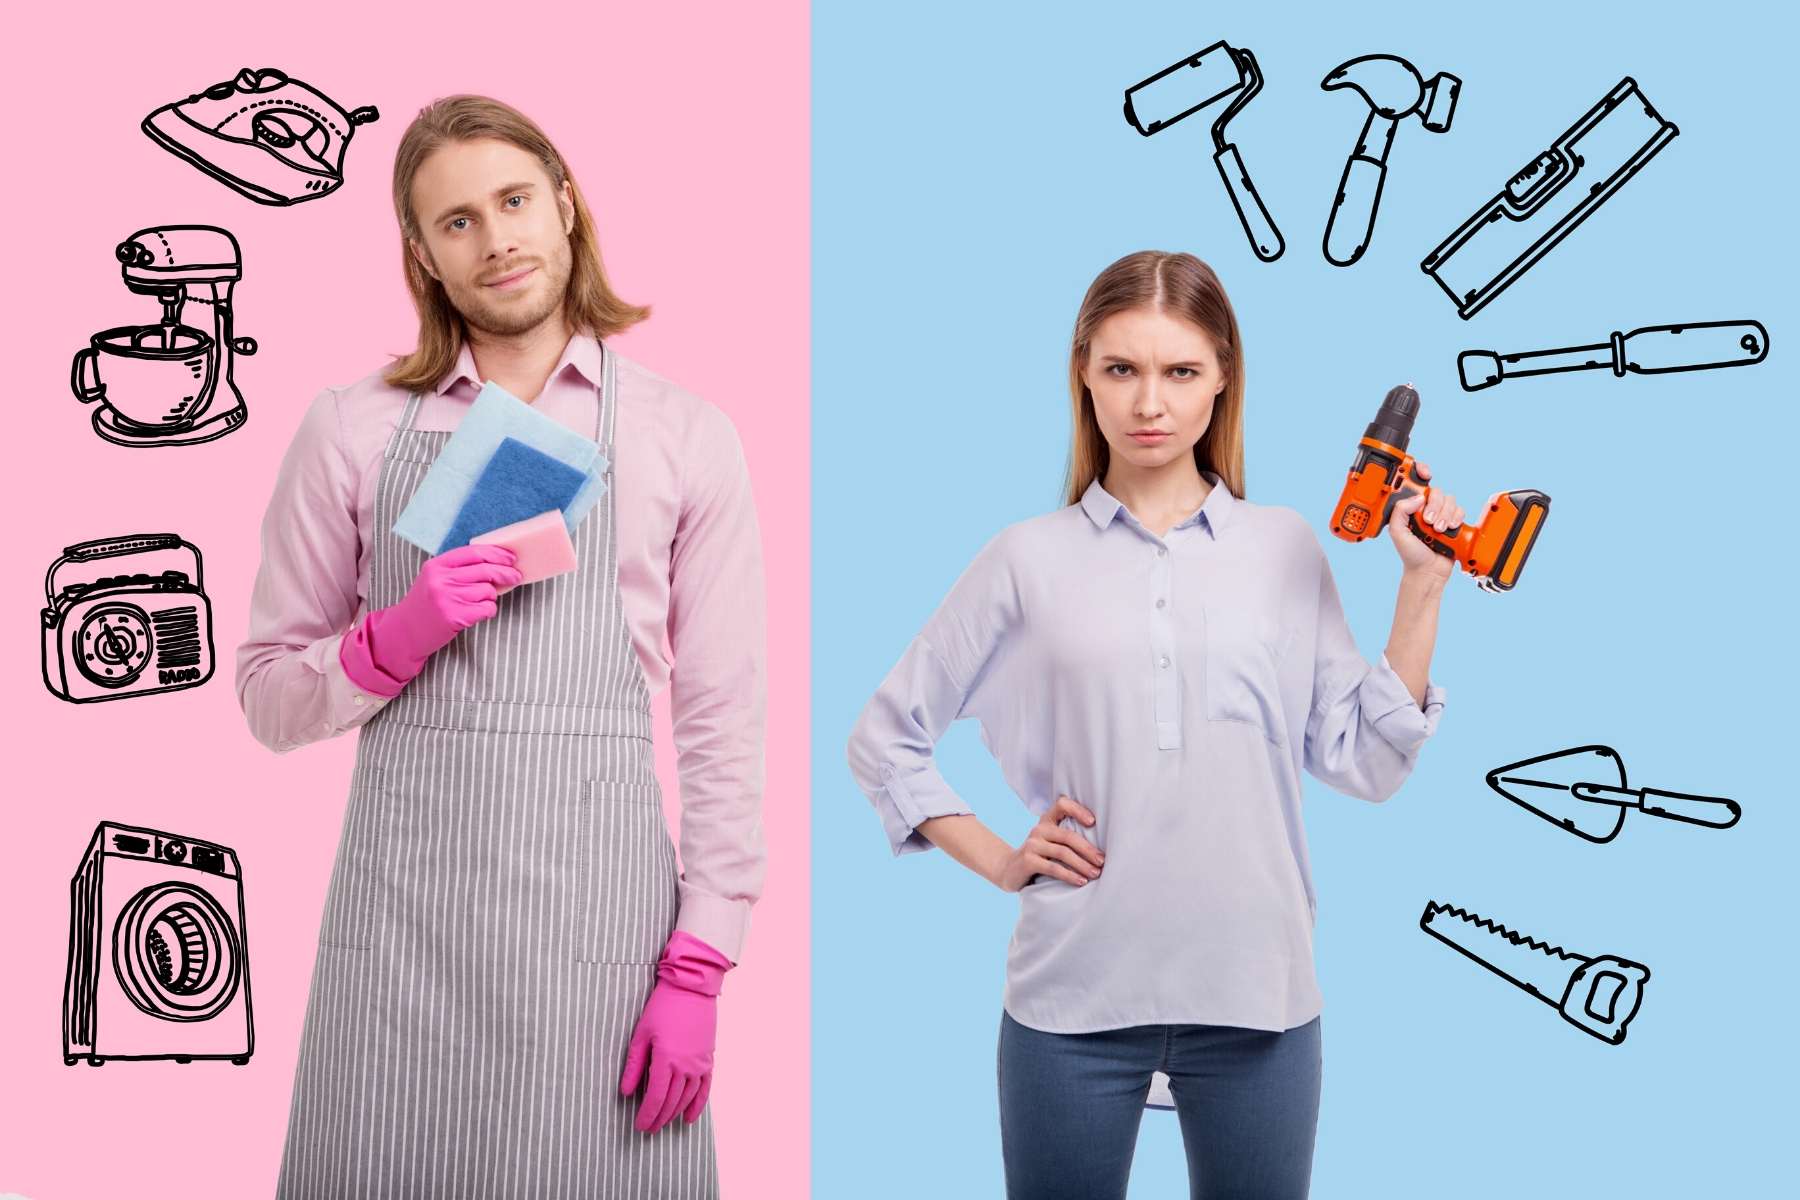 A man and a woman holding tools in front of a pink background.